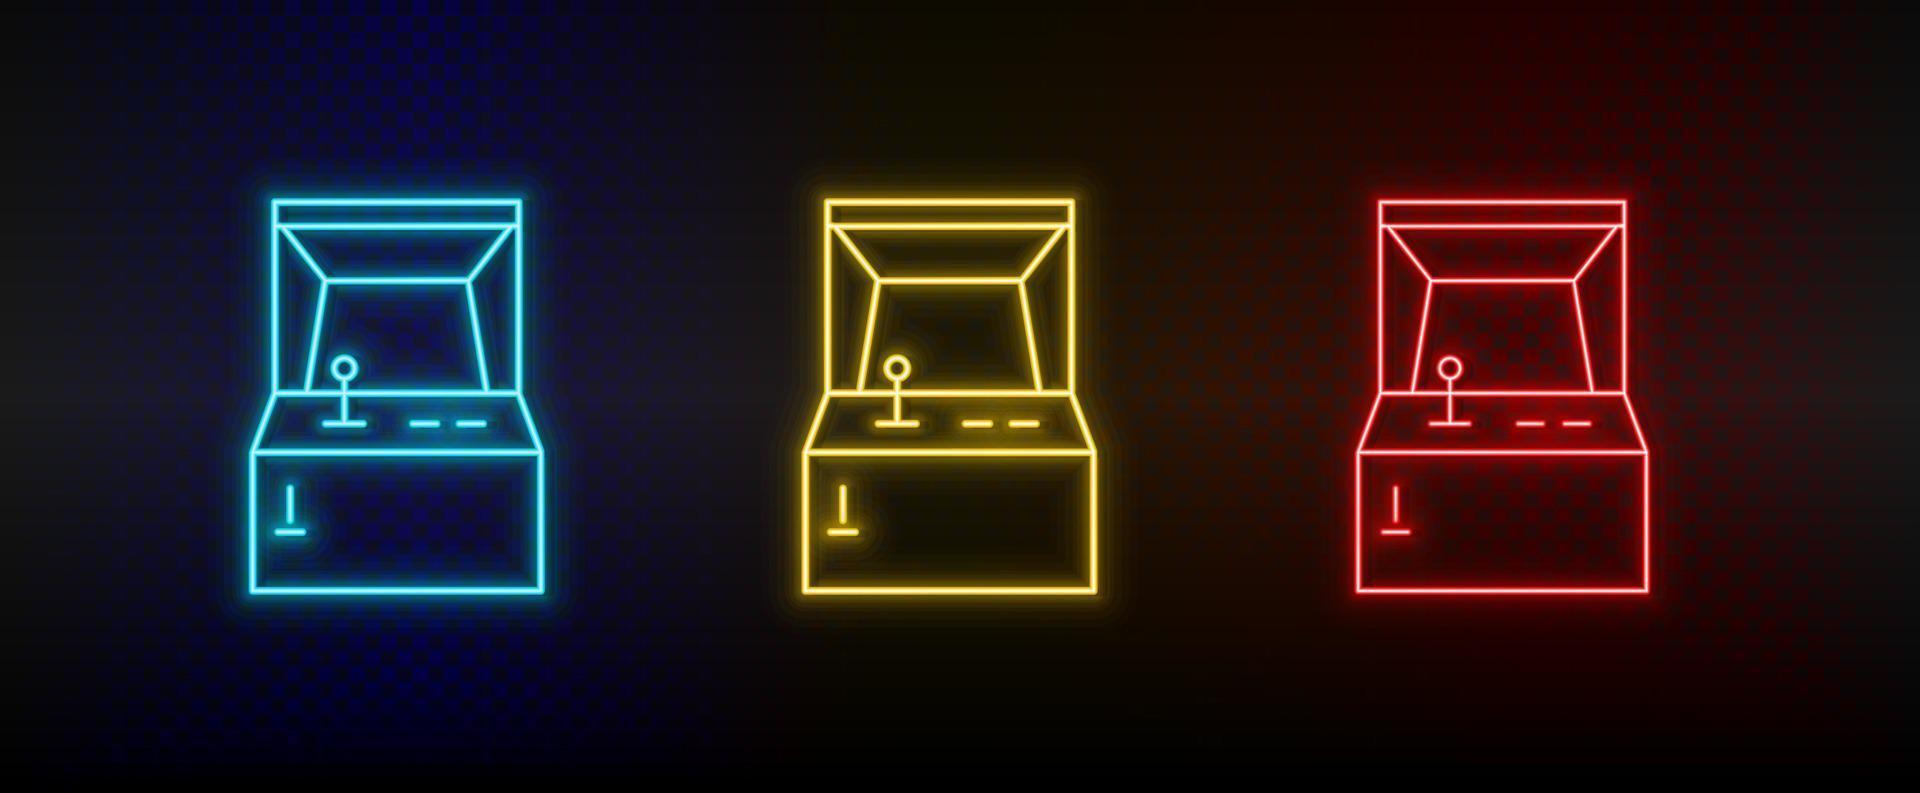 Neon icons. Console retro game arcade. Set of red, blue, yellow neon vector icon on darken background